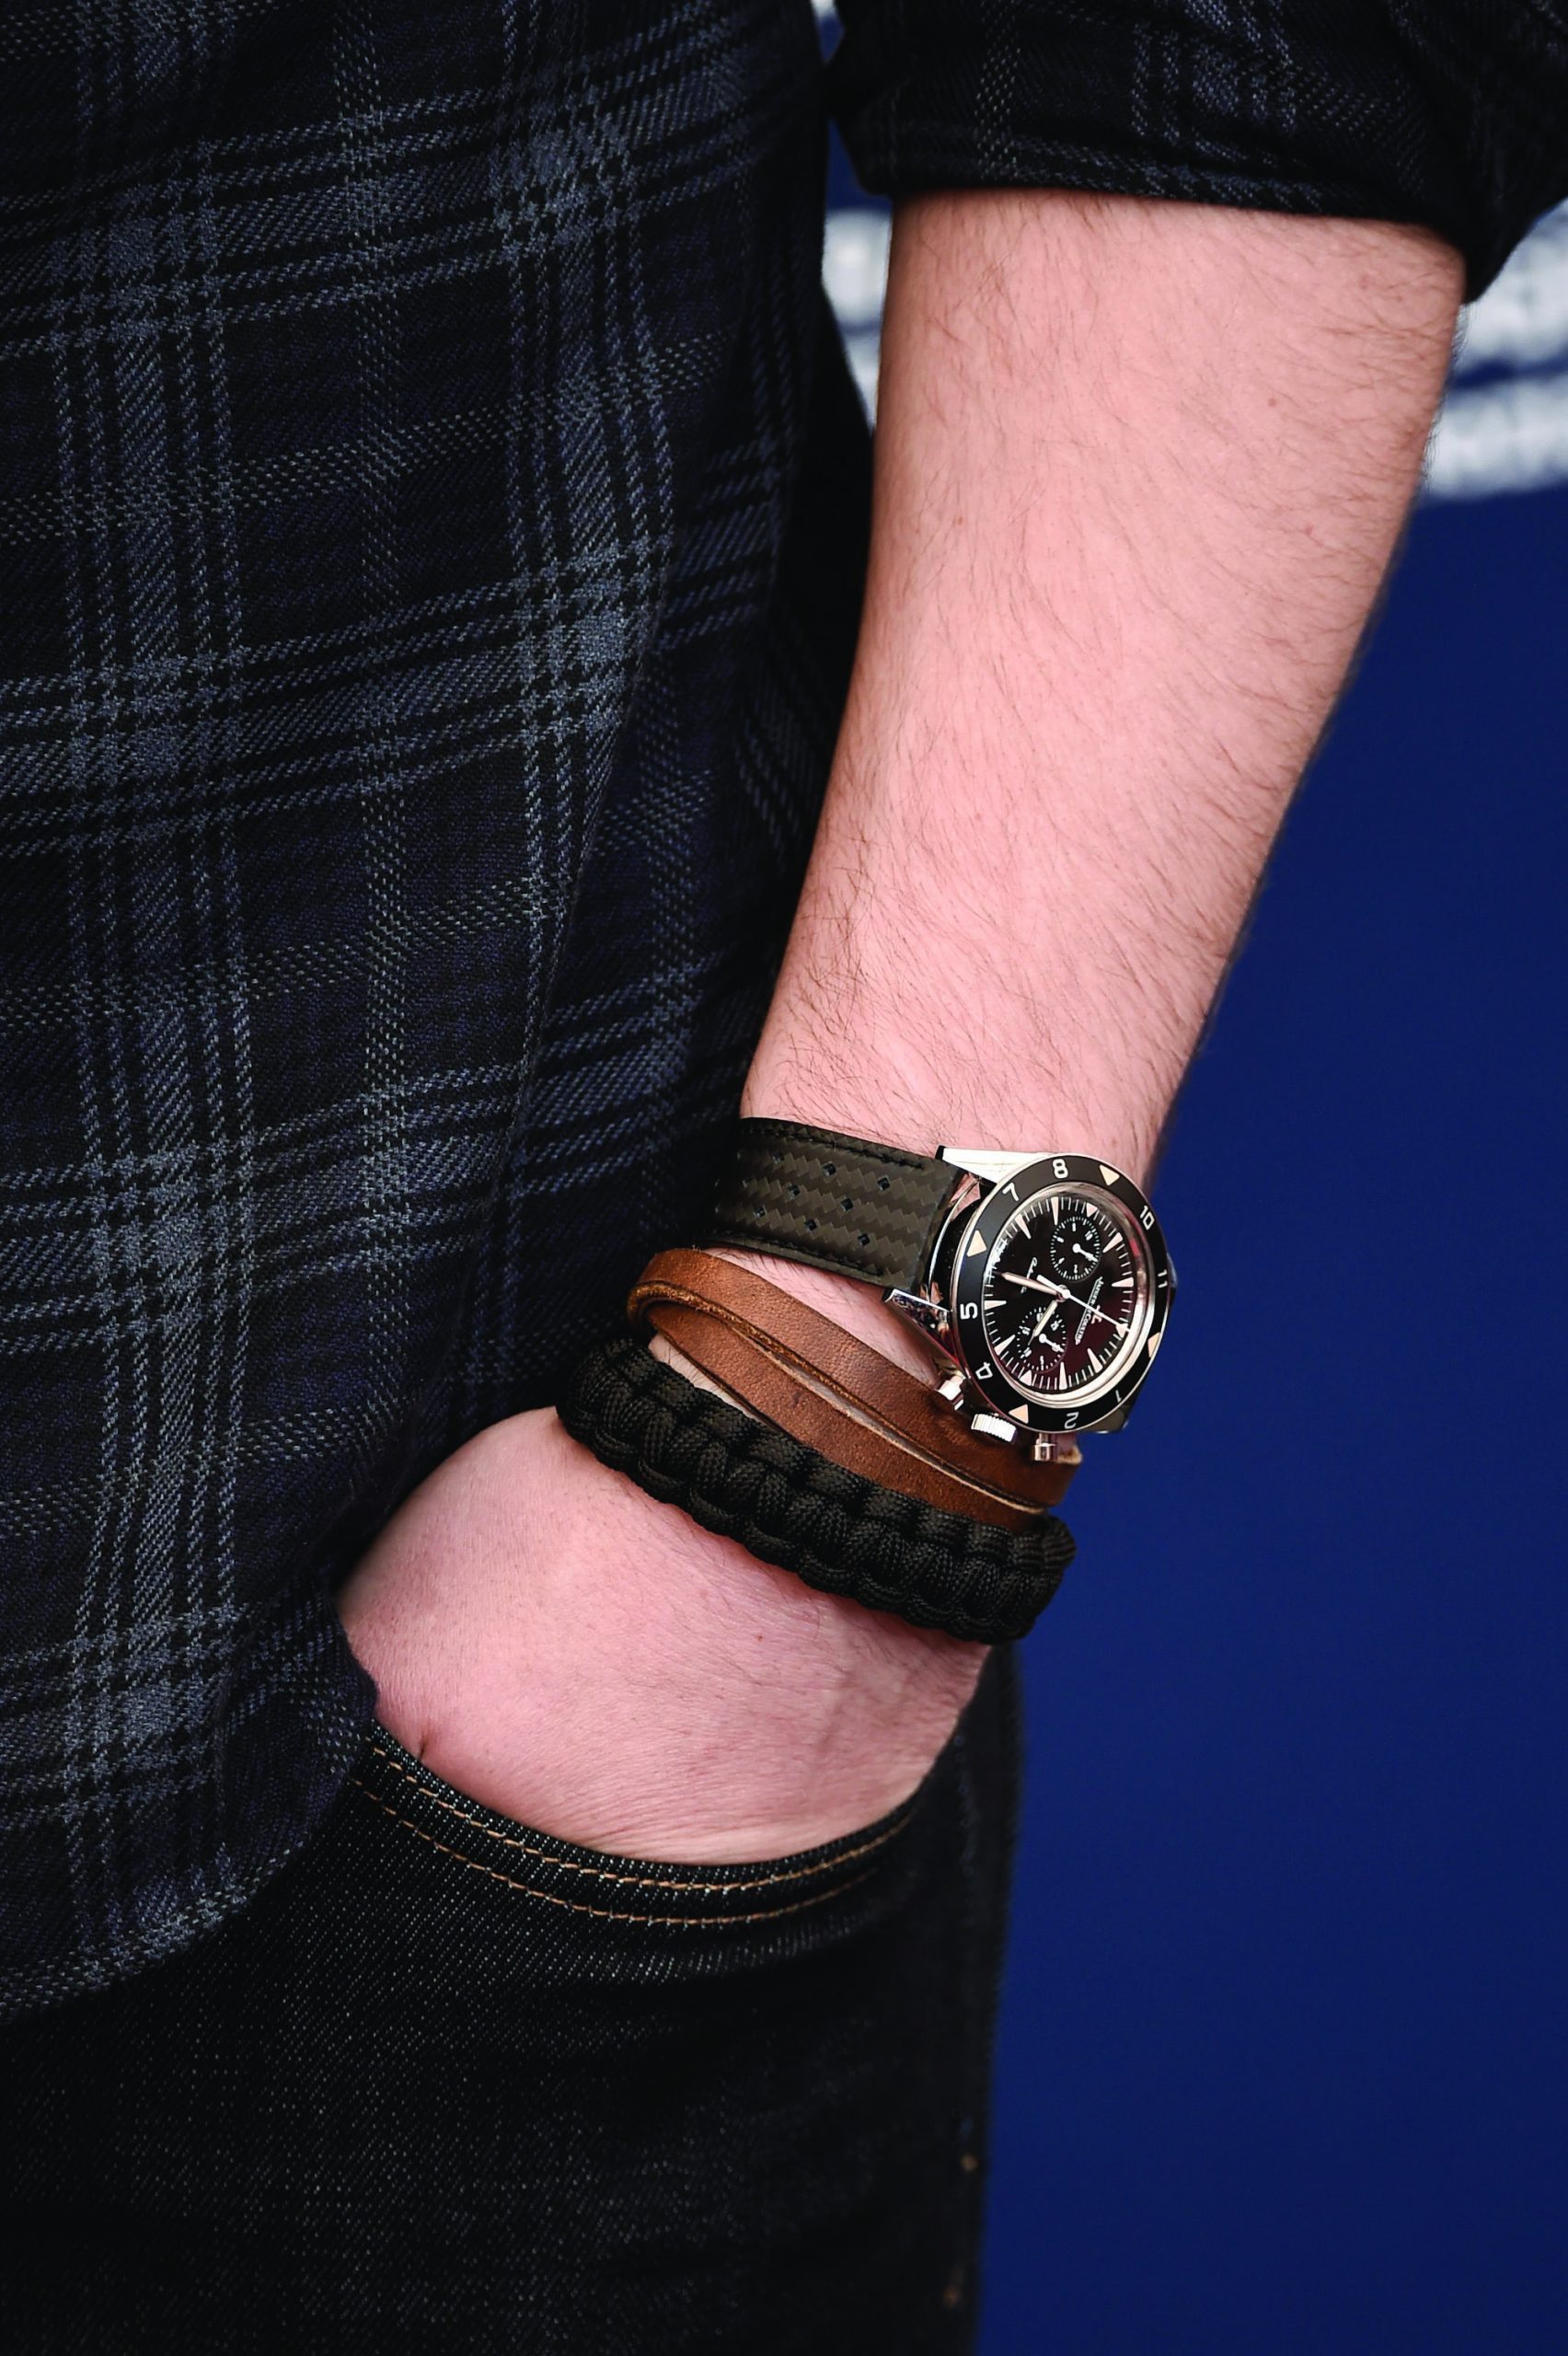 Nicholas Hoult Spotted Wearing Jaeger-LeCoultre At The Venice Film Festival